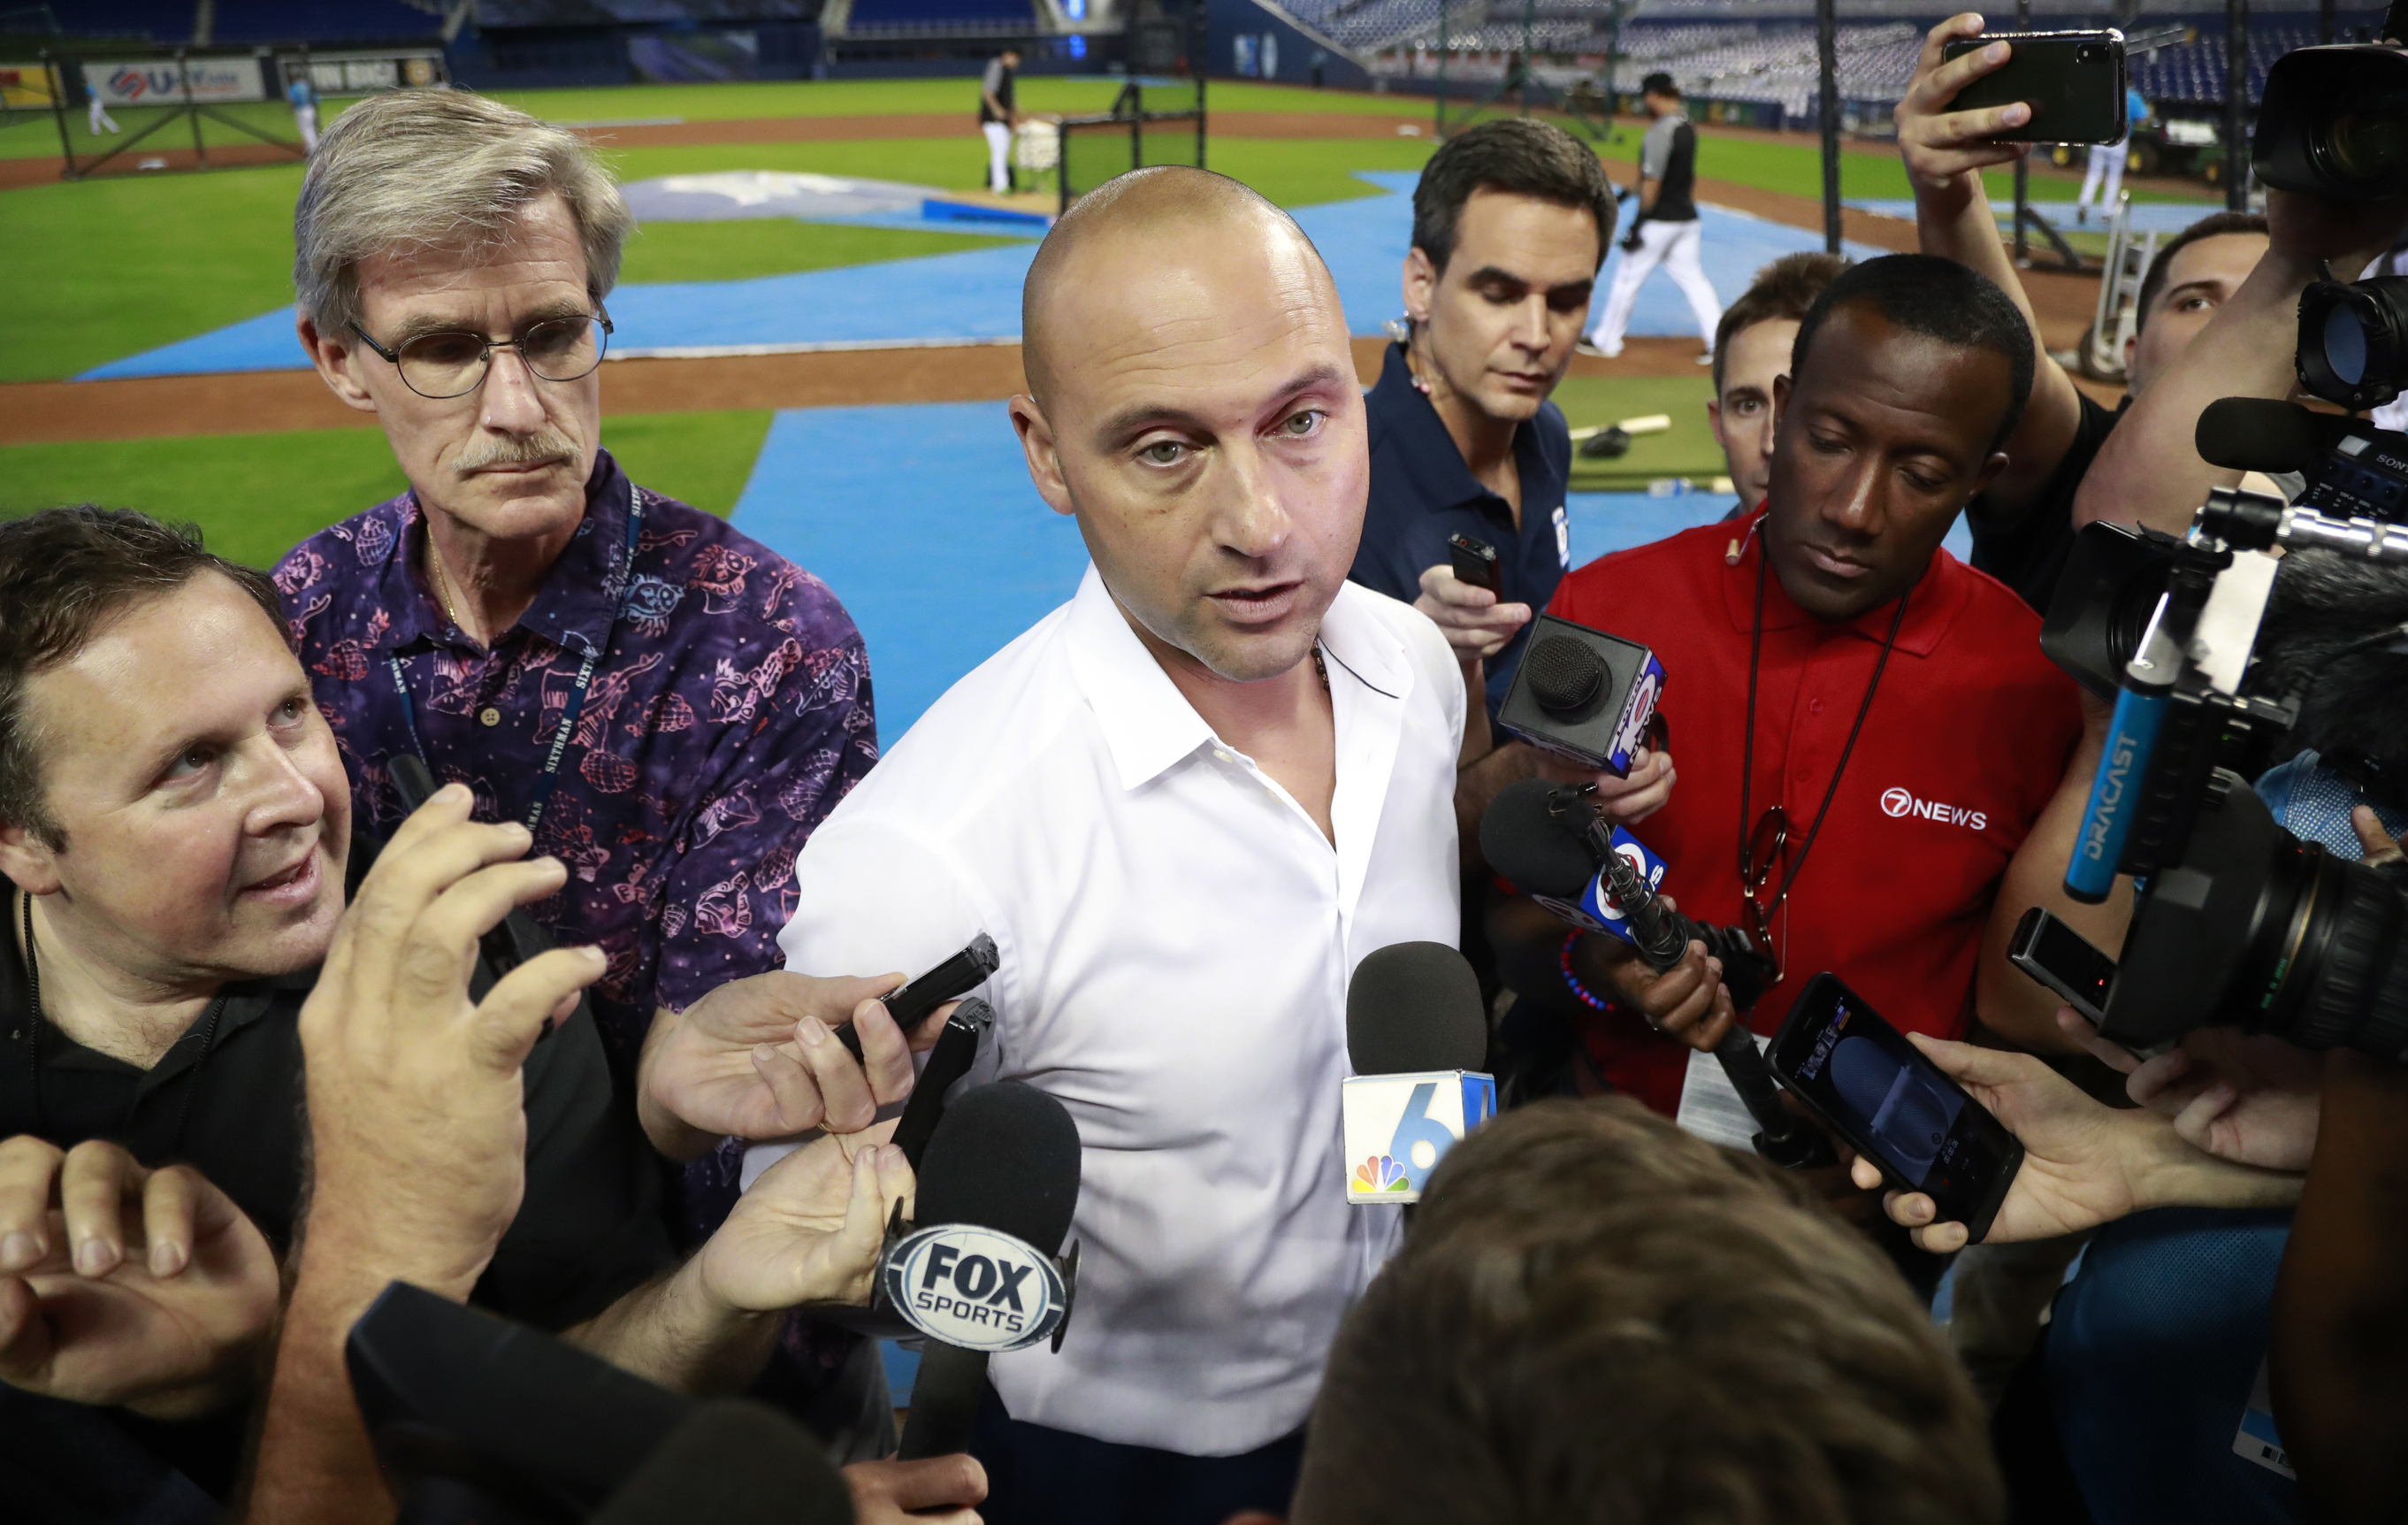 A decade of losing: Marlins begin another long offseason